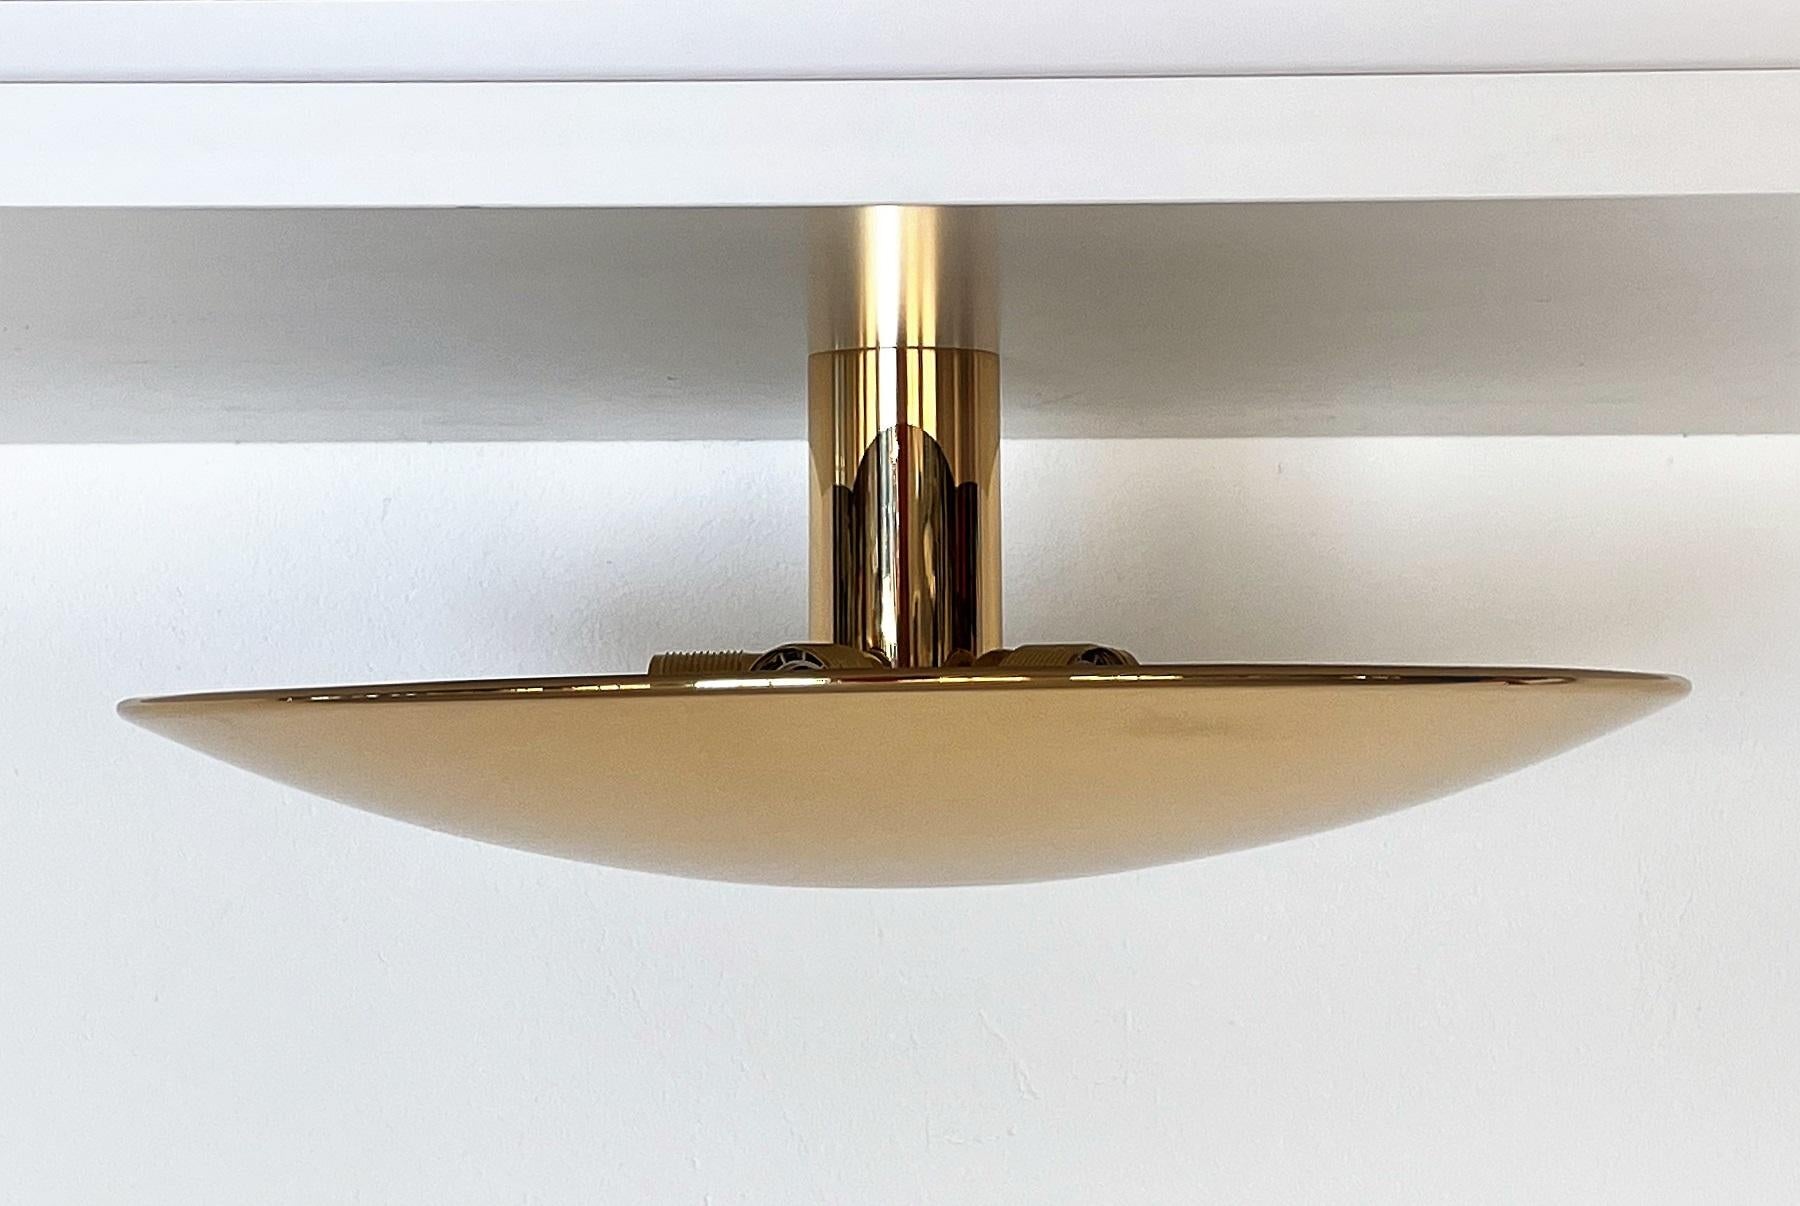 Magnificent, large version of flush-mount light or wall sconce made of full polished shiny brass by Florian Schulz.
The large round dome plate is screwed on the wall or ceiling unit, which holds five Edison light bulbs.
The full polished brass is